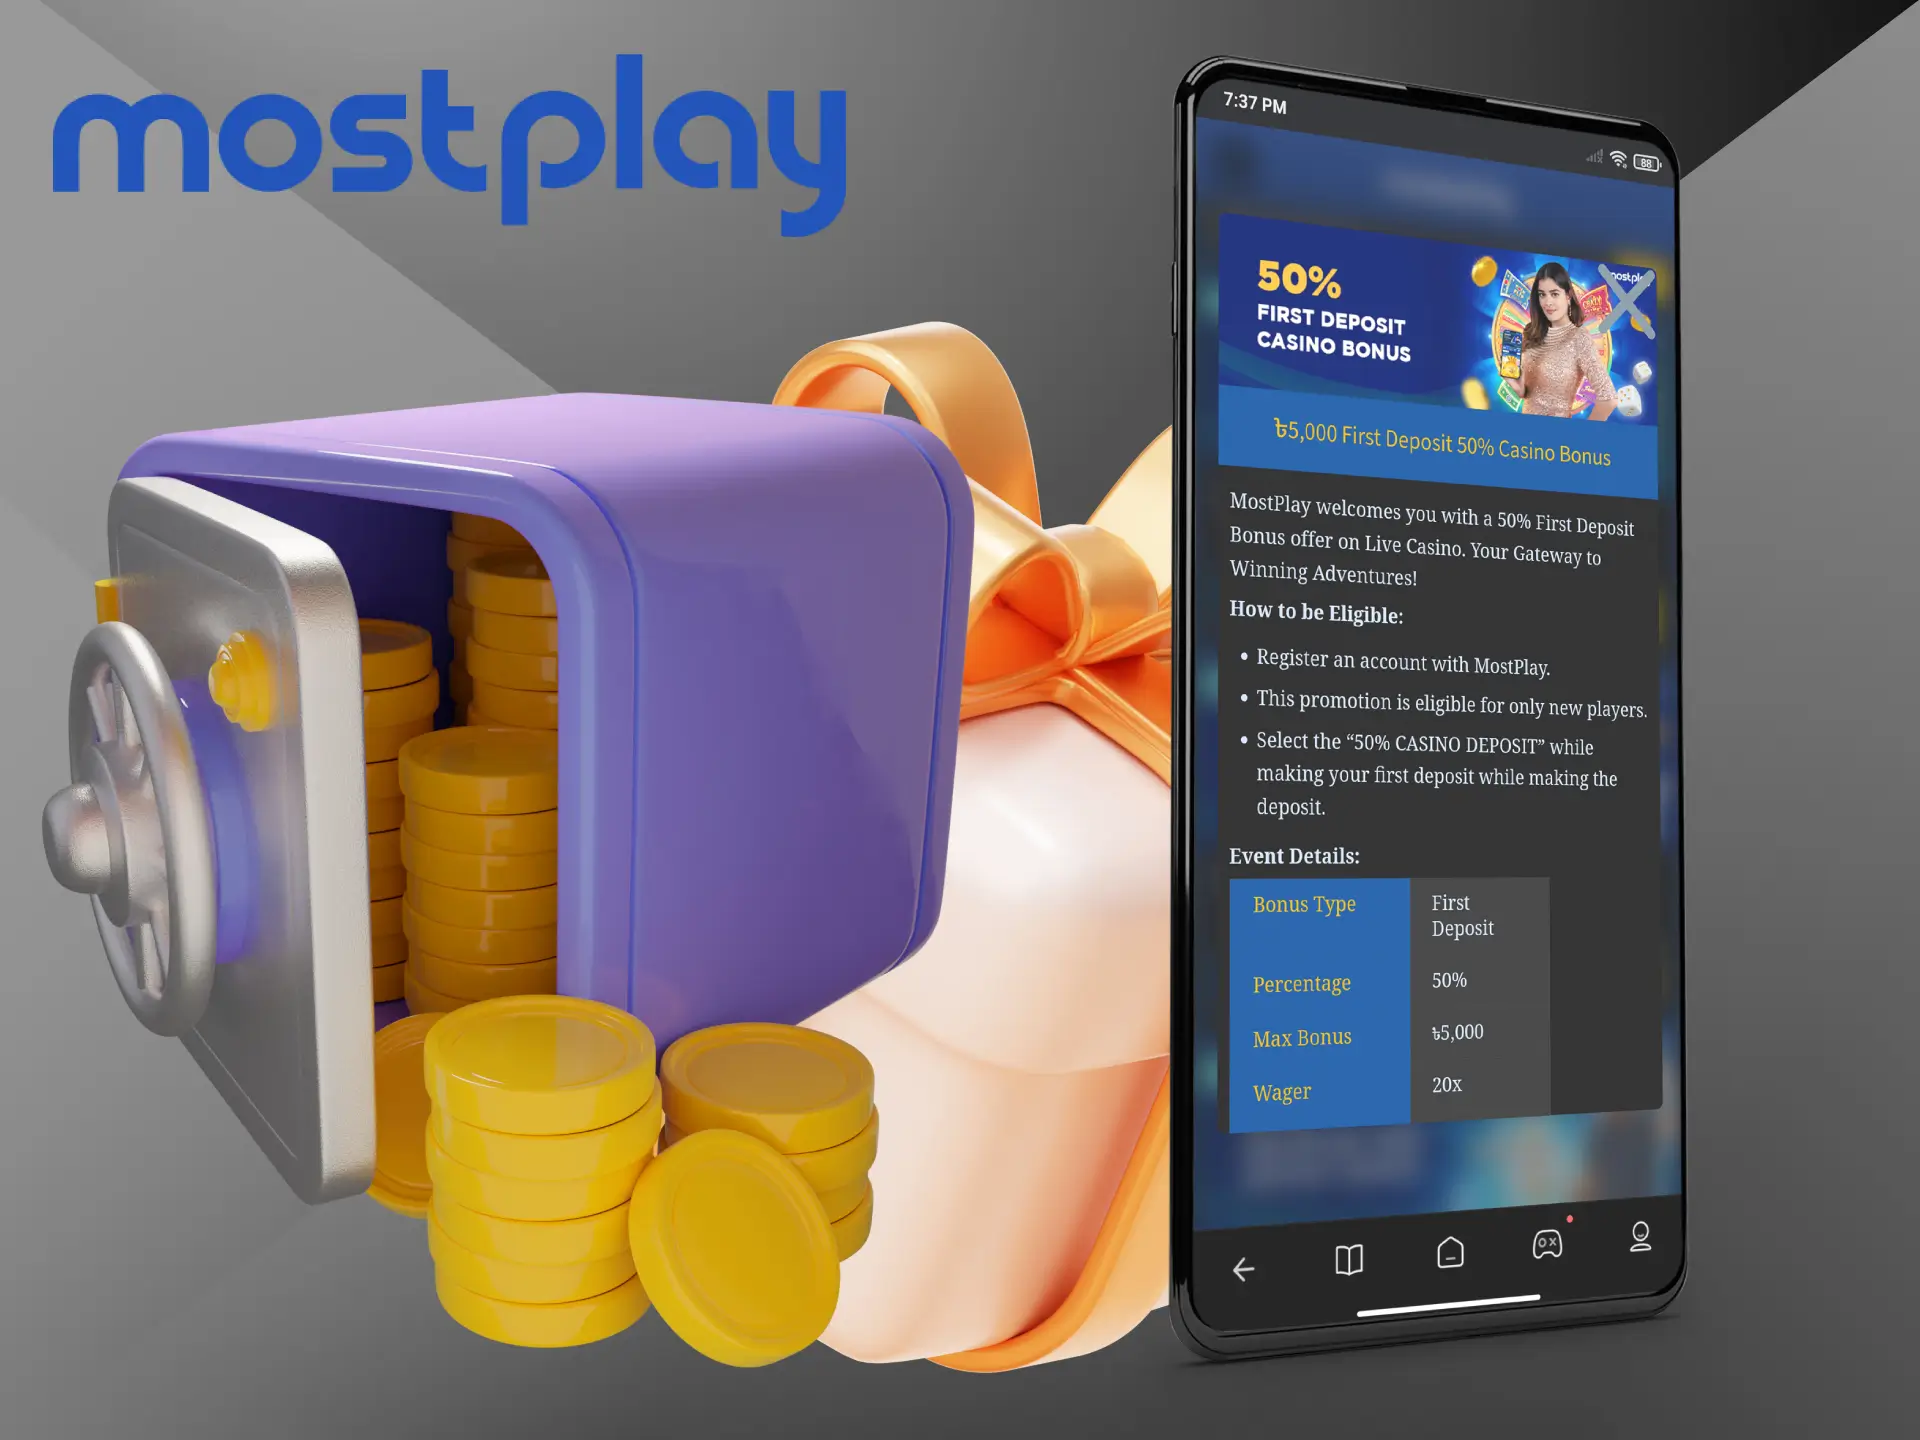 Complete your registration and get your first coveted bonus from Mostplay Casino.